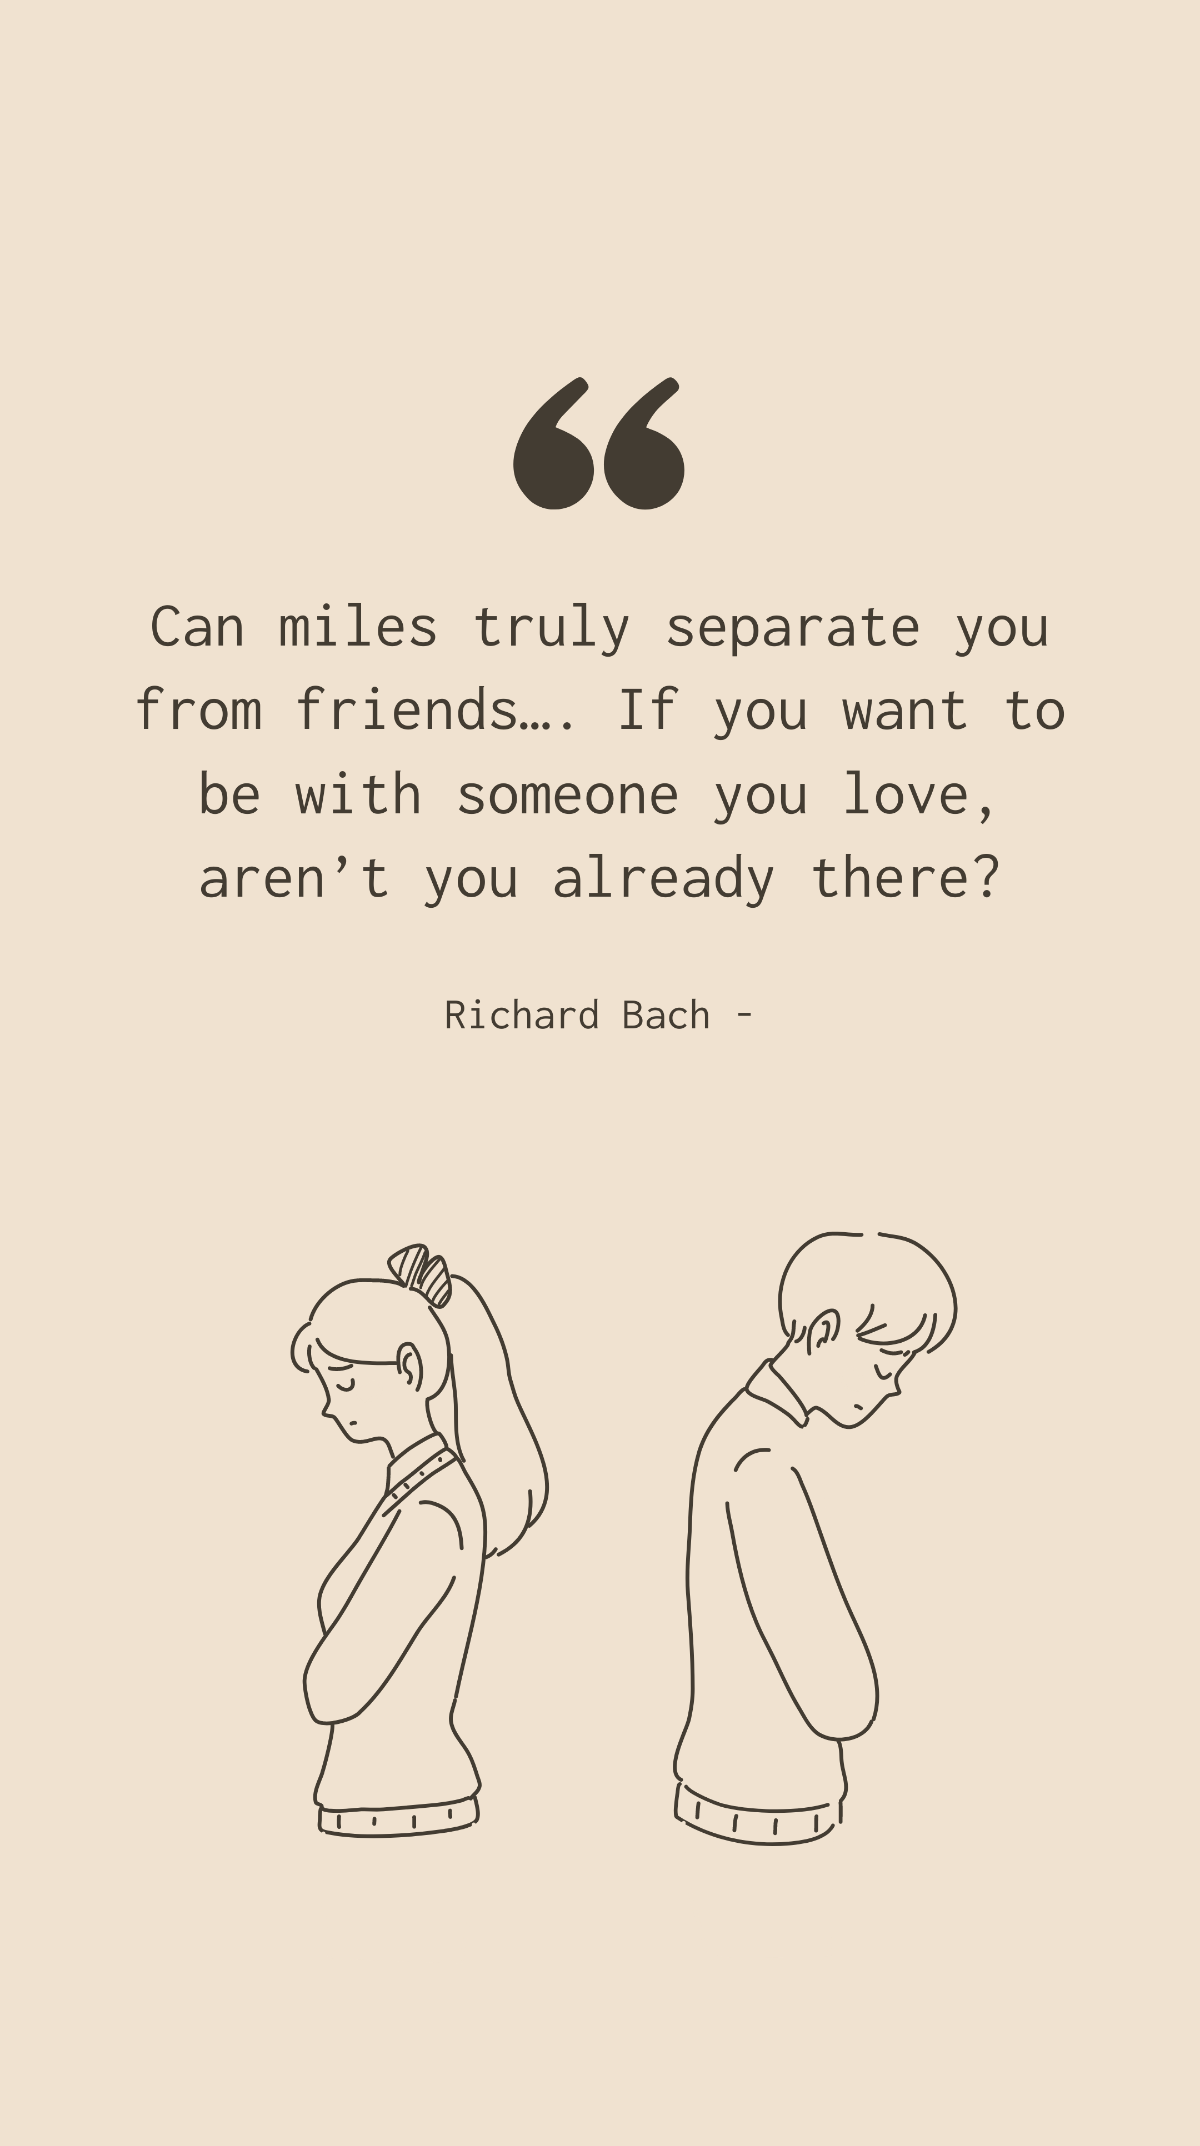 Richard Bach - Can miles truly separate you from friends…. If you want to be with someone you love, aren’t you already there?